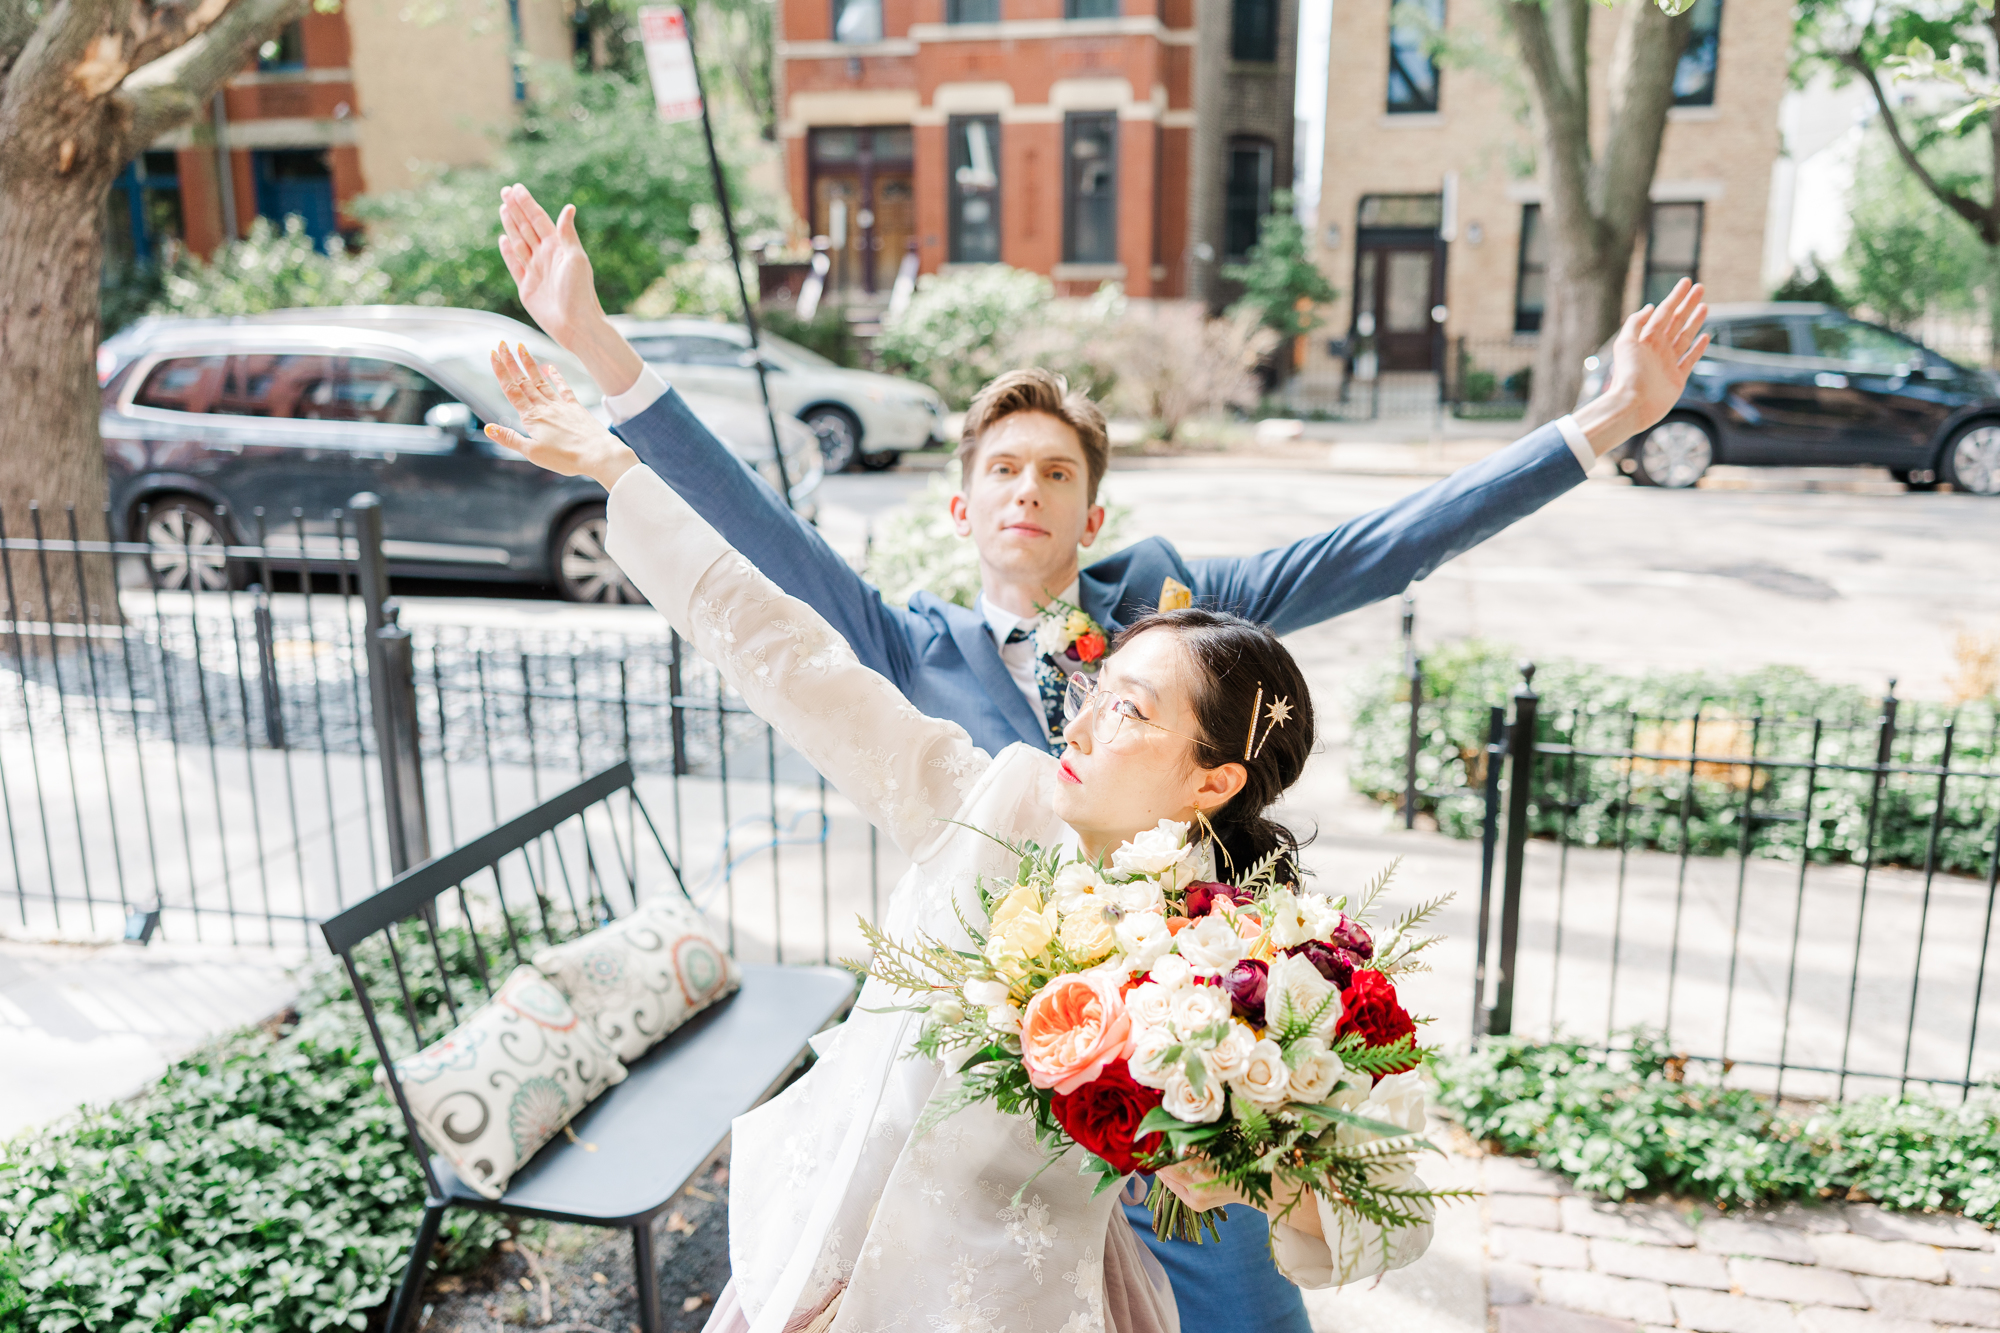 Exciting Chicago Micro Wedding Photos at Wicker Park Inn in Fall